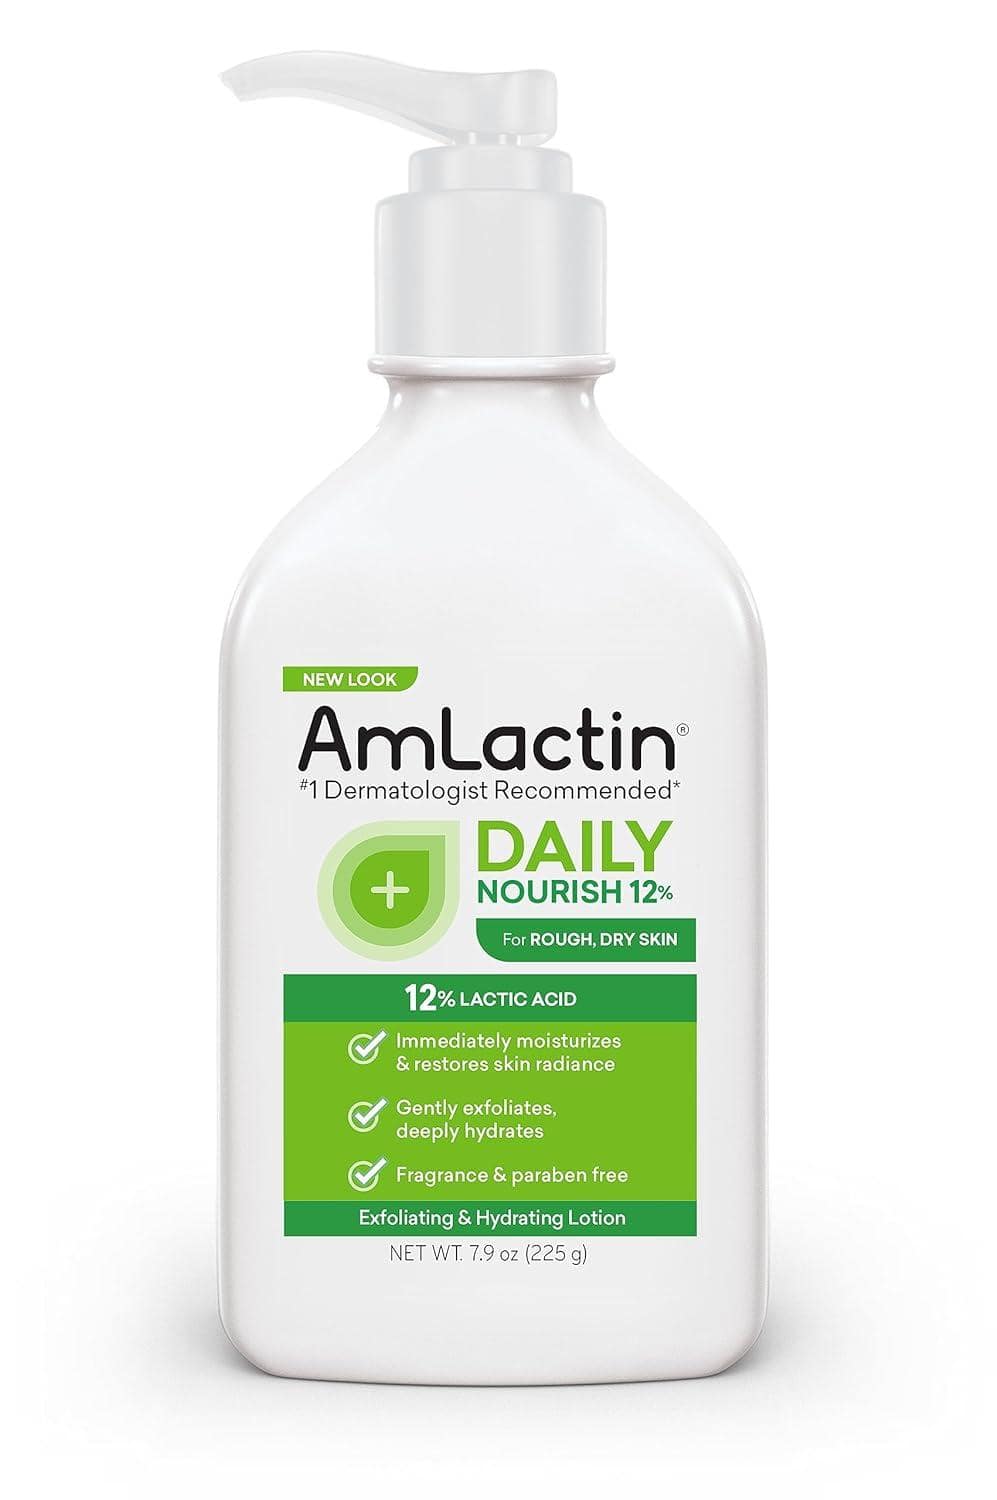 AmLactin's Daily Moisturizing Body Lotion, infused with lactic acid, is my go-to moisturizer-effectively softening dry skin and easing the persistent itchiness of this condition.